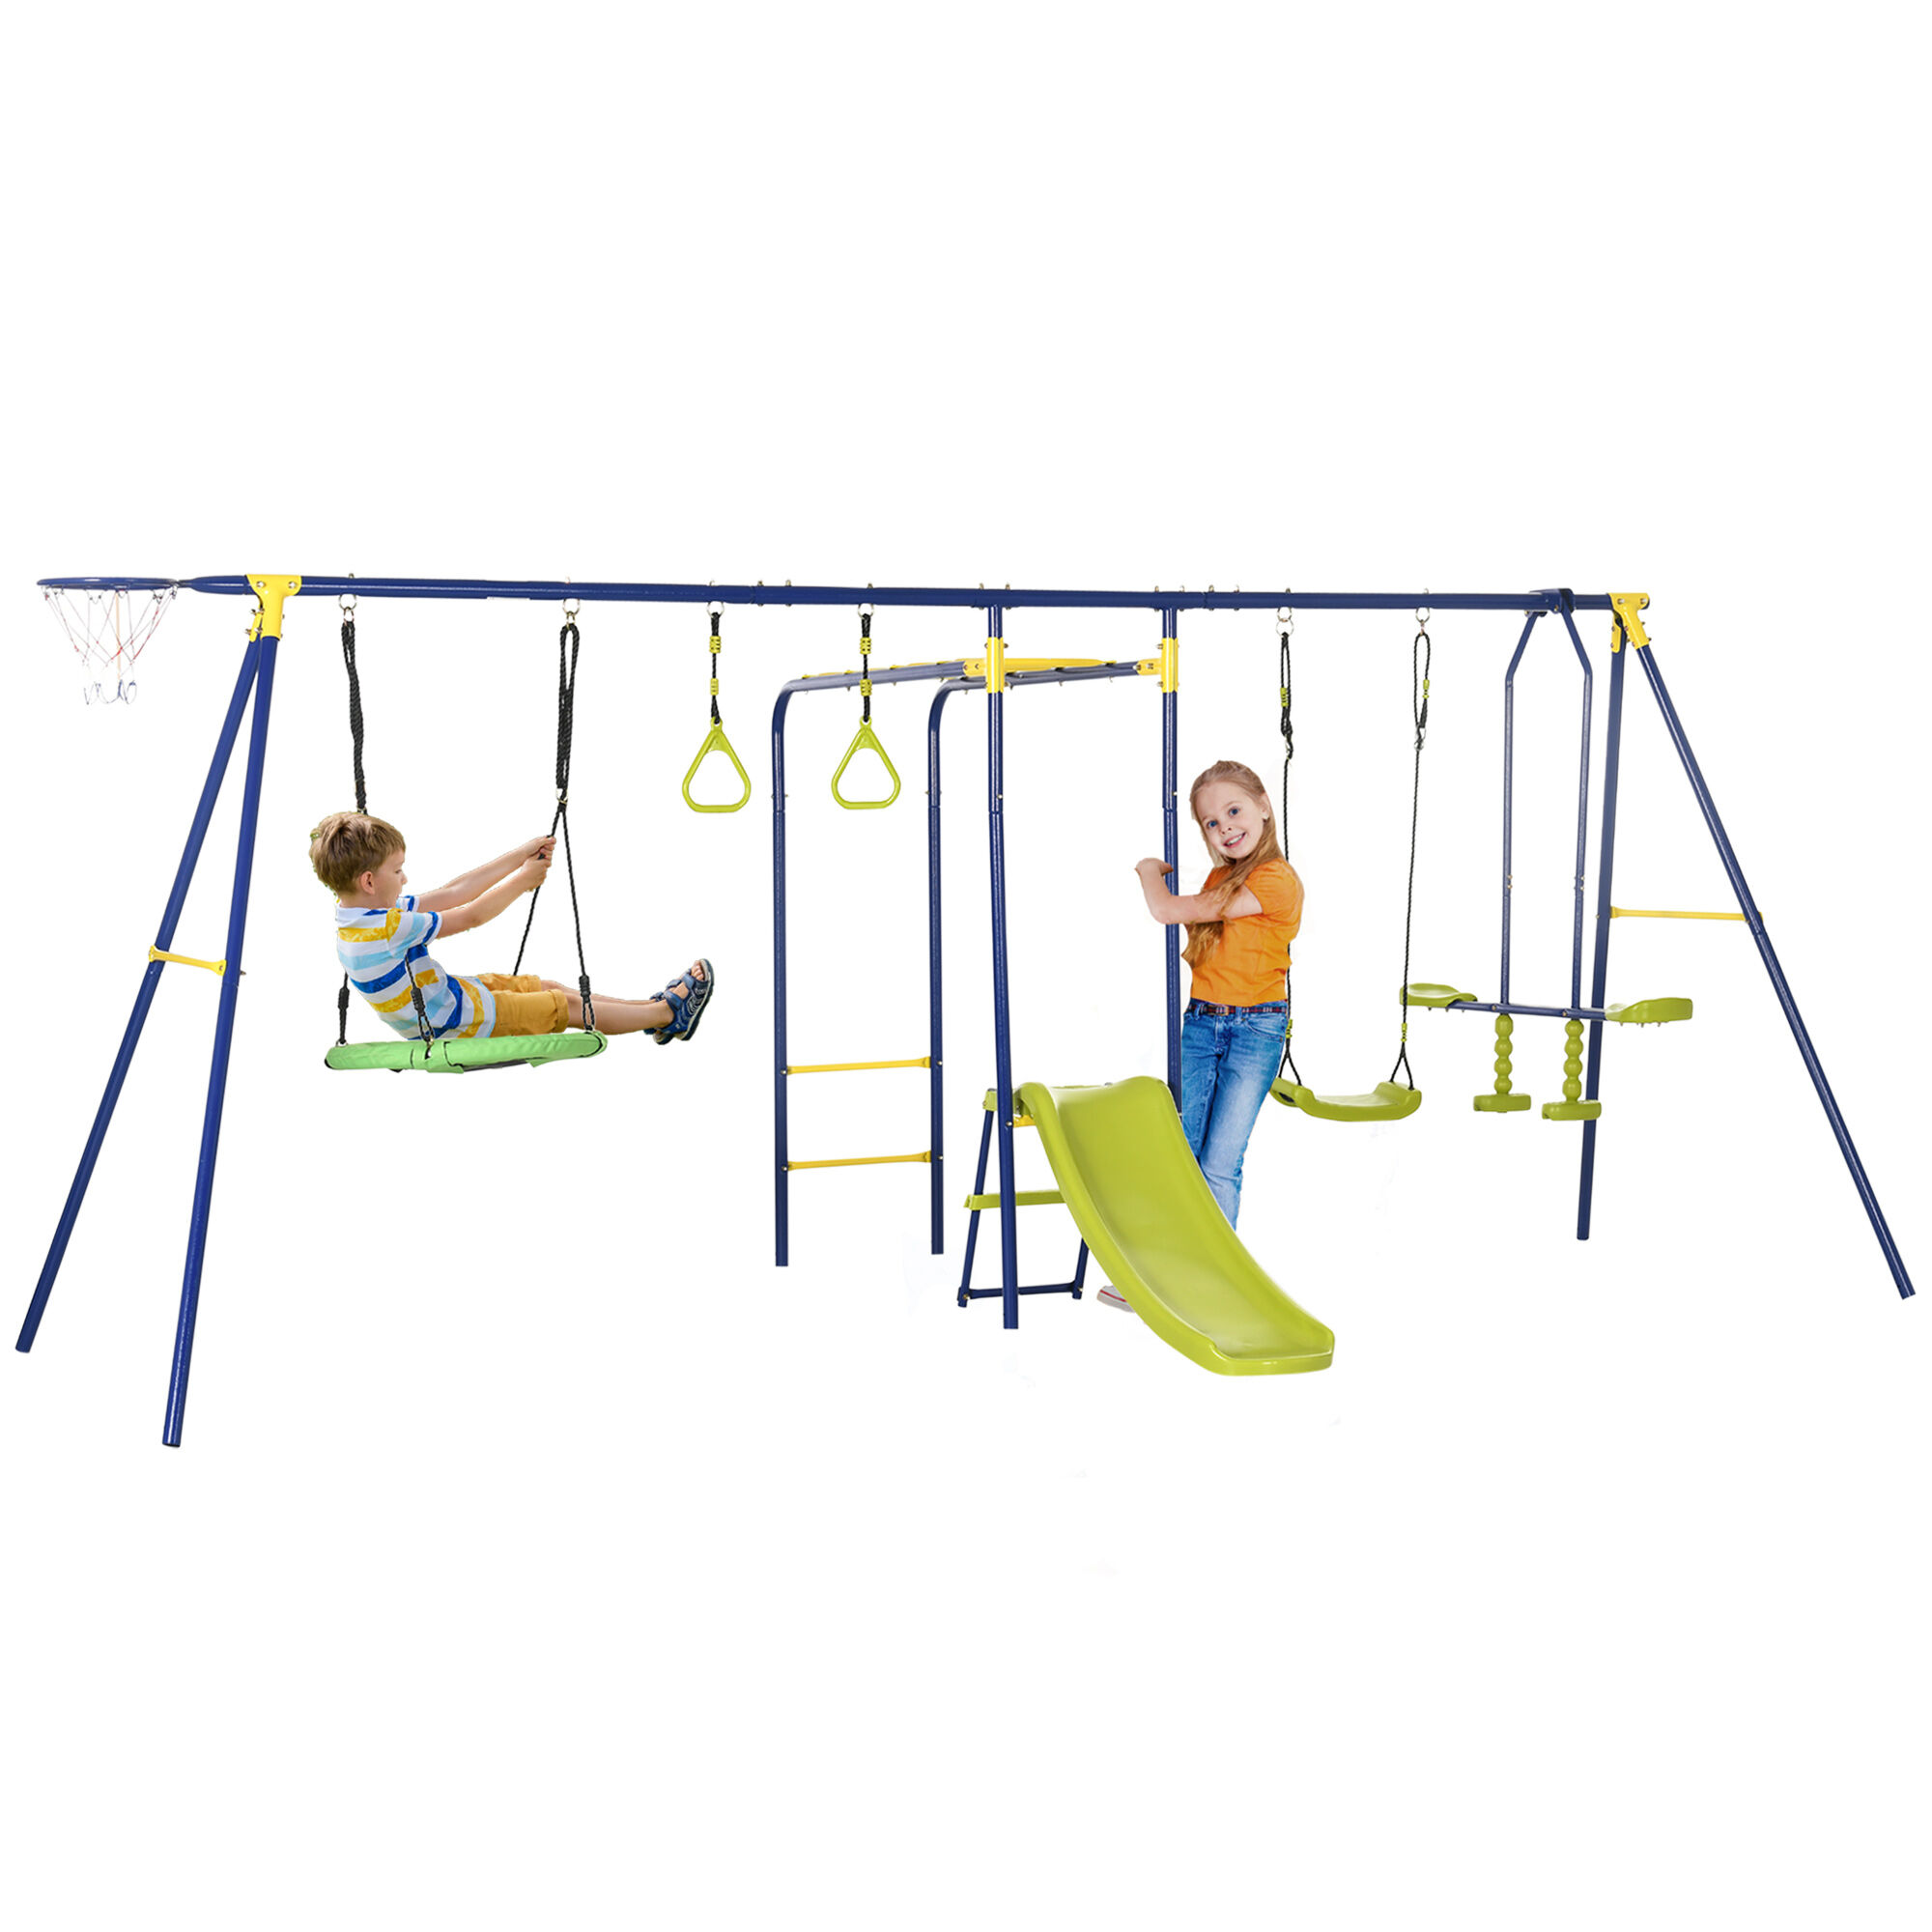 Outsunny Heavy-Duty Metal Swing Sets for Backyard, with A-Frame Swing Stand, Saucer Swing, Glider, Slide, Gym Rings, Basketball Hoop